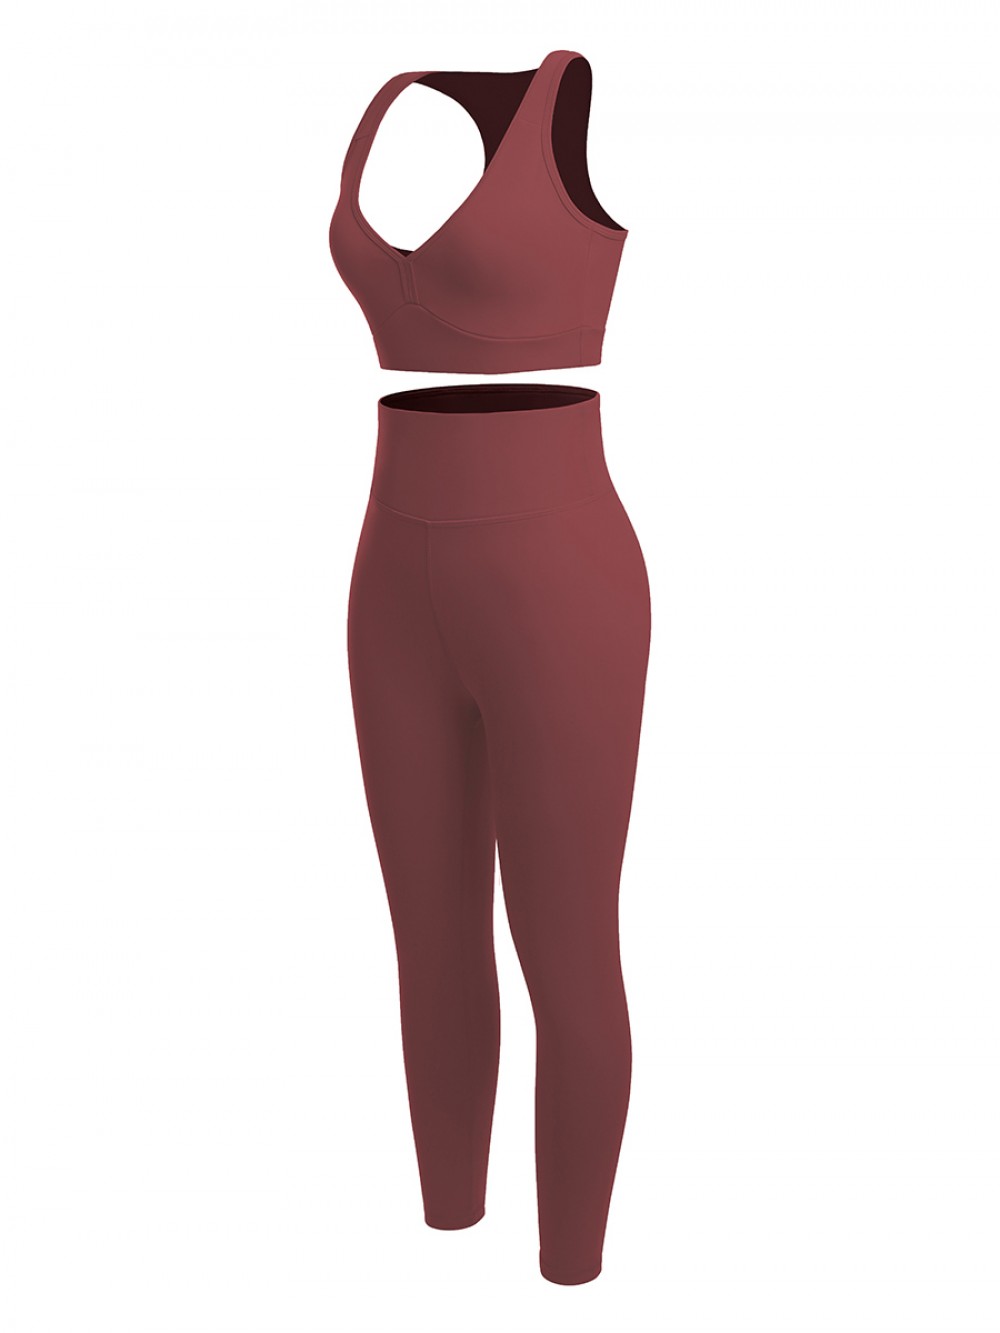 Jujube Red Running Suit High Rise Solid Color For Exercising